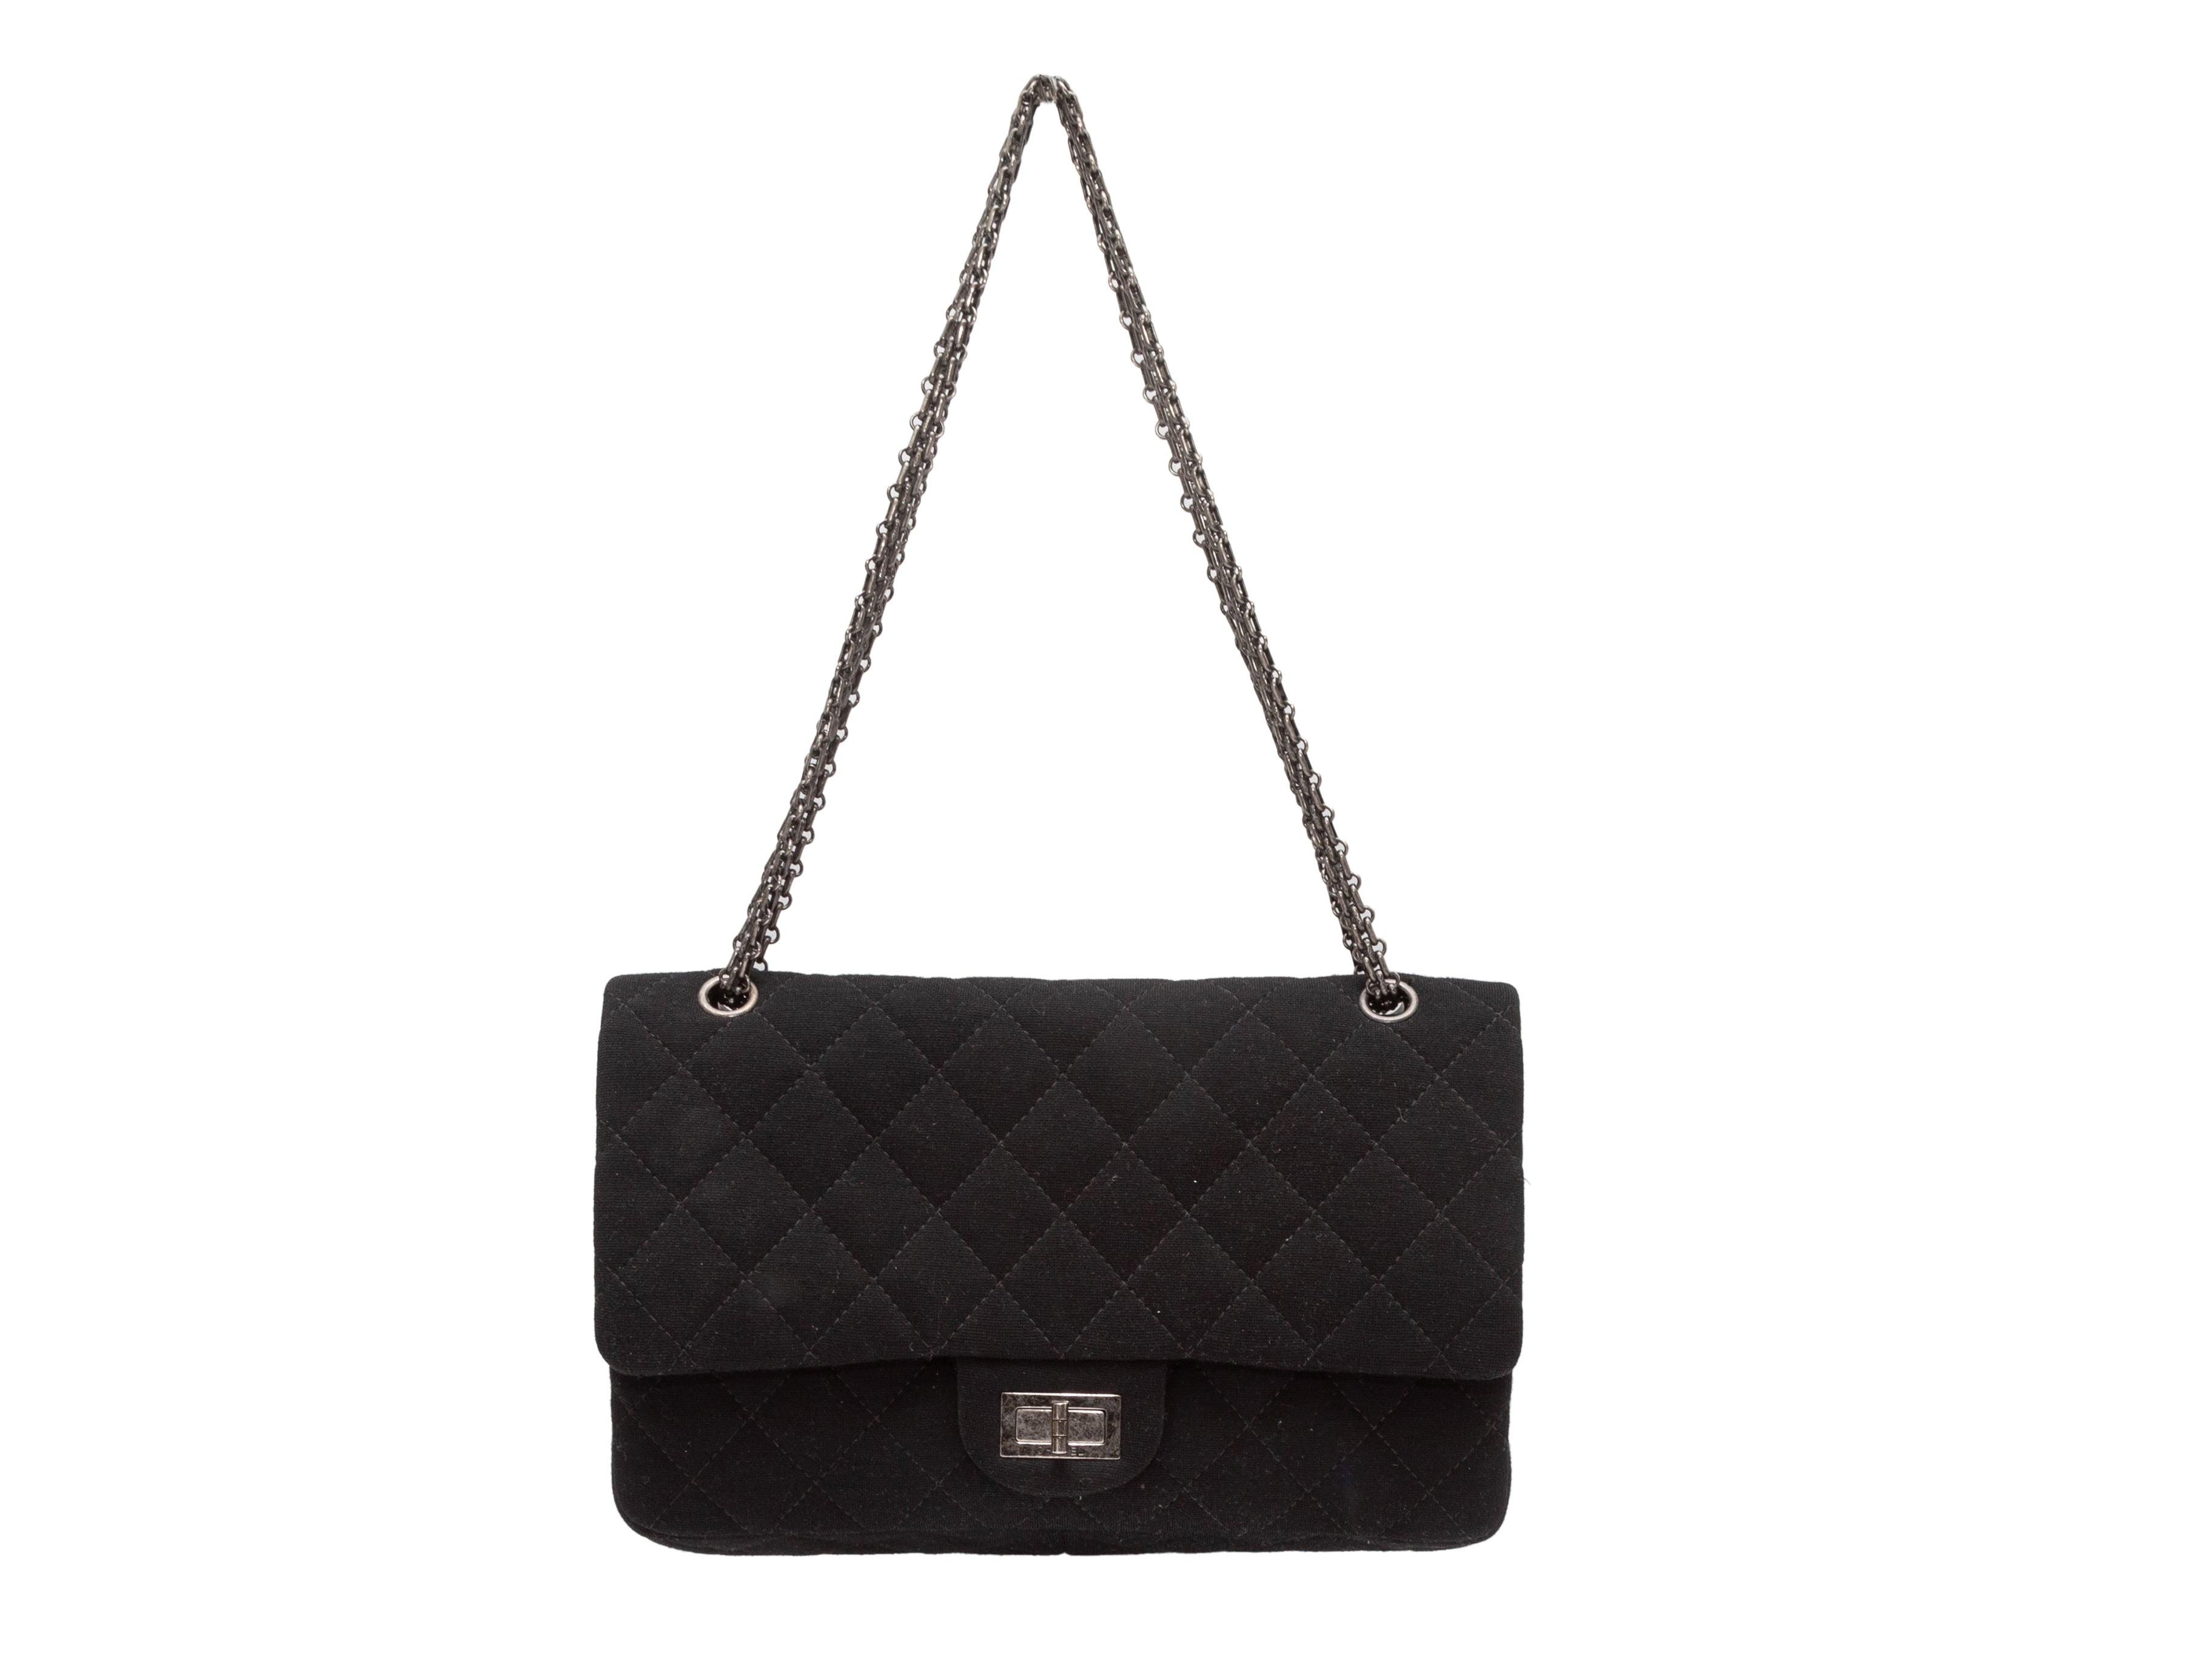 CHANEL Patent Quilted Accordion Reissue 2.55 Flap Navy | FASHIONPHILE